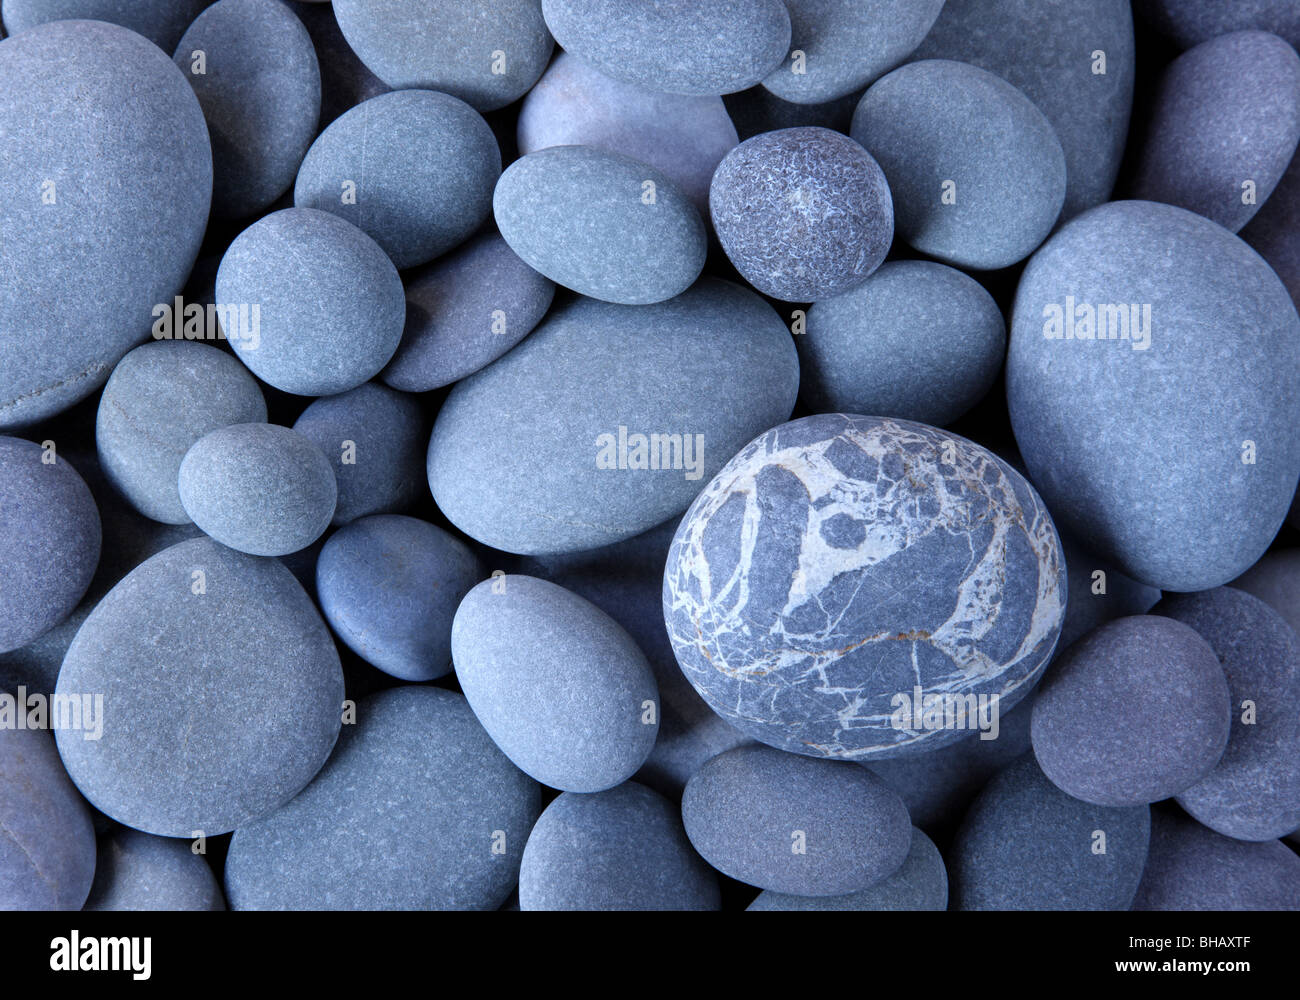 Close up of smooth granite pebbles on Hurlestone beach, Somerset, England filling frame. Stock Photo